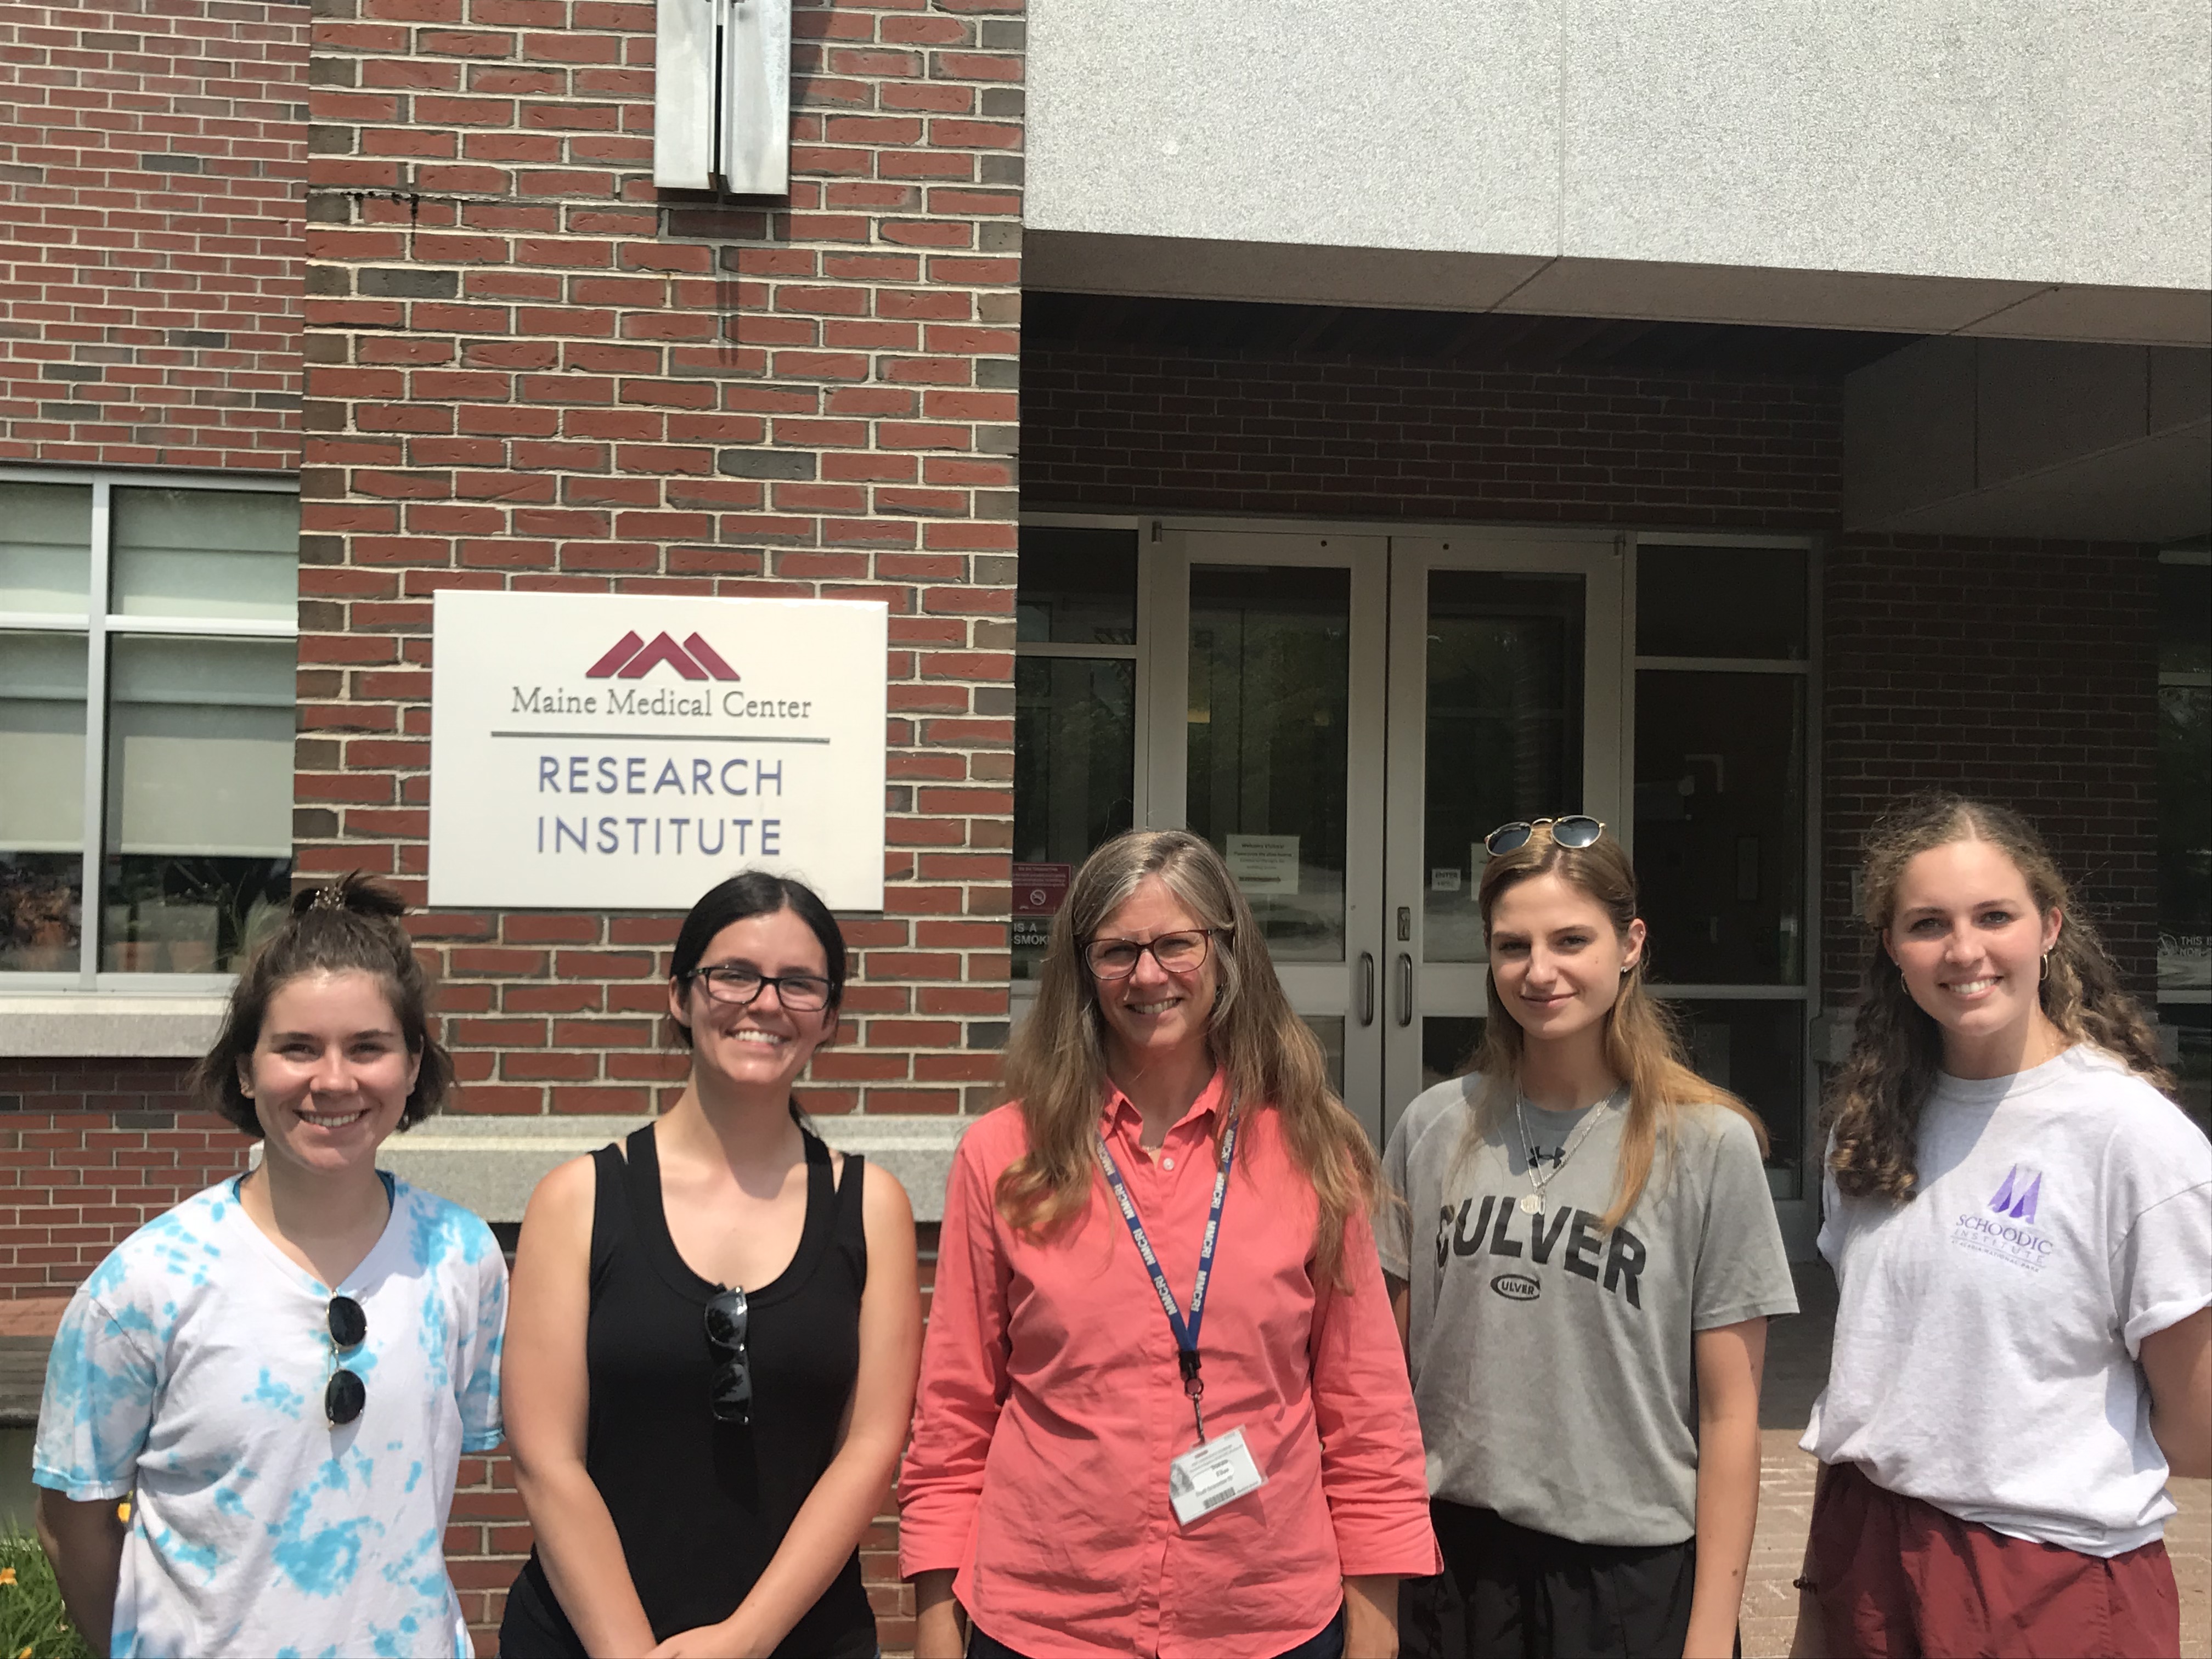 The summer 2019 Southern Maine Health and Air Quality team visited with project partner Dr. Susan Elias to hear more about the community concerns and goals for the project. Image Credit: Zachary Bengtsson